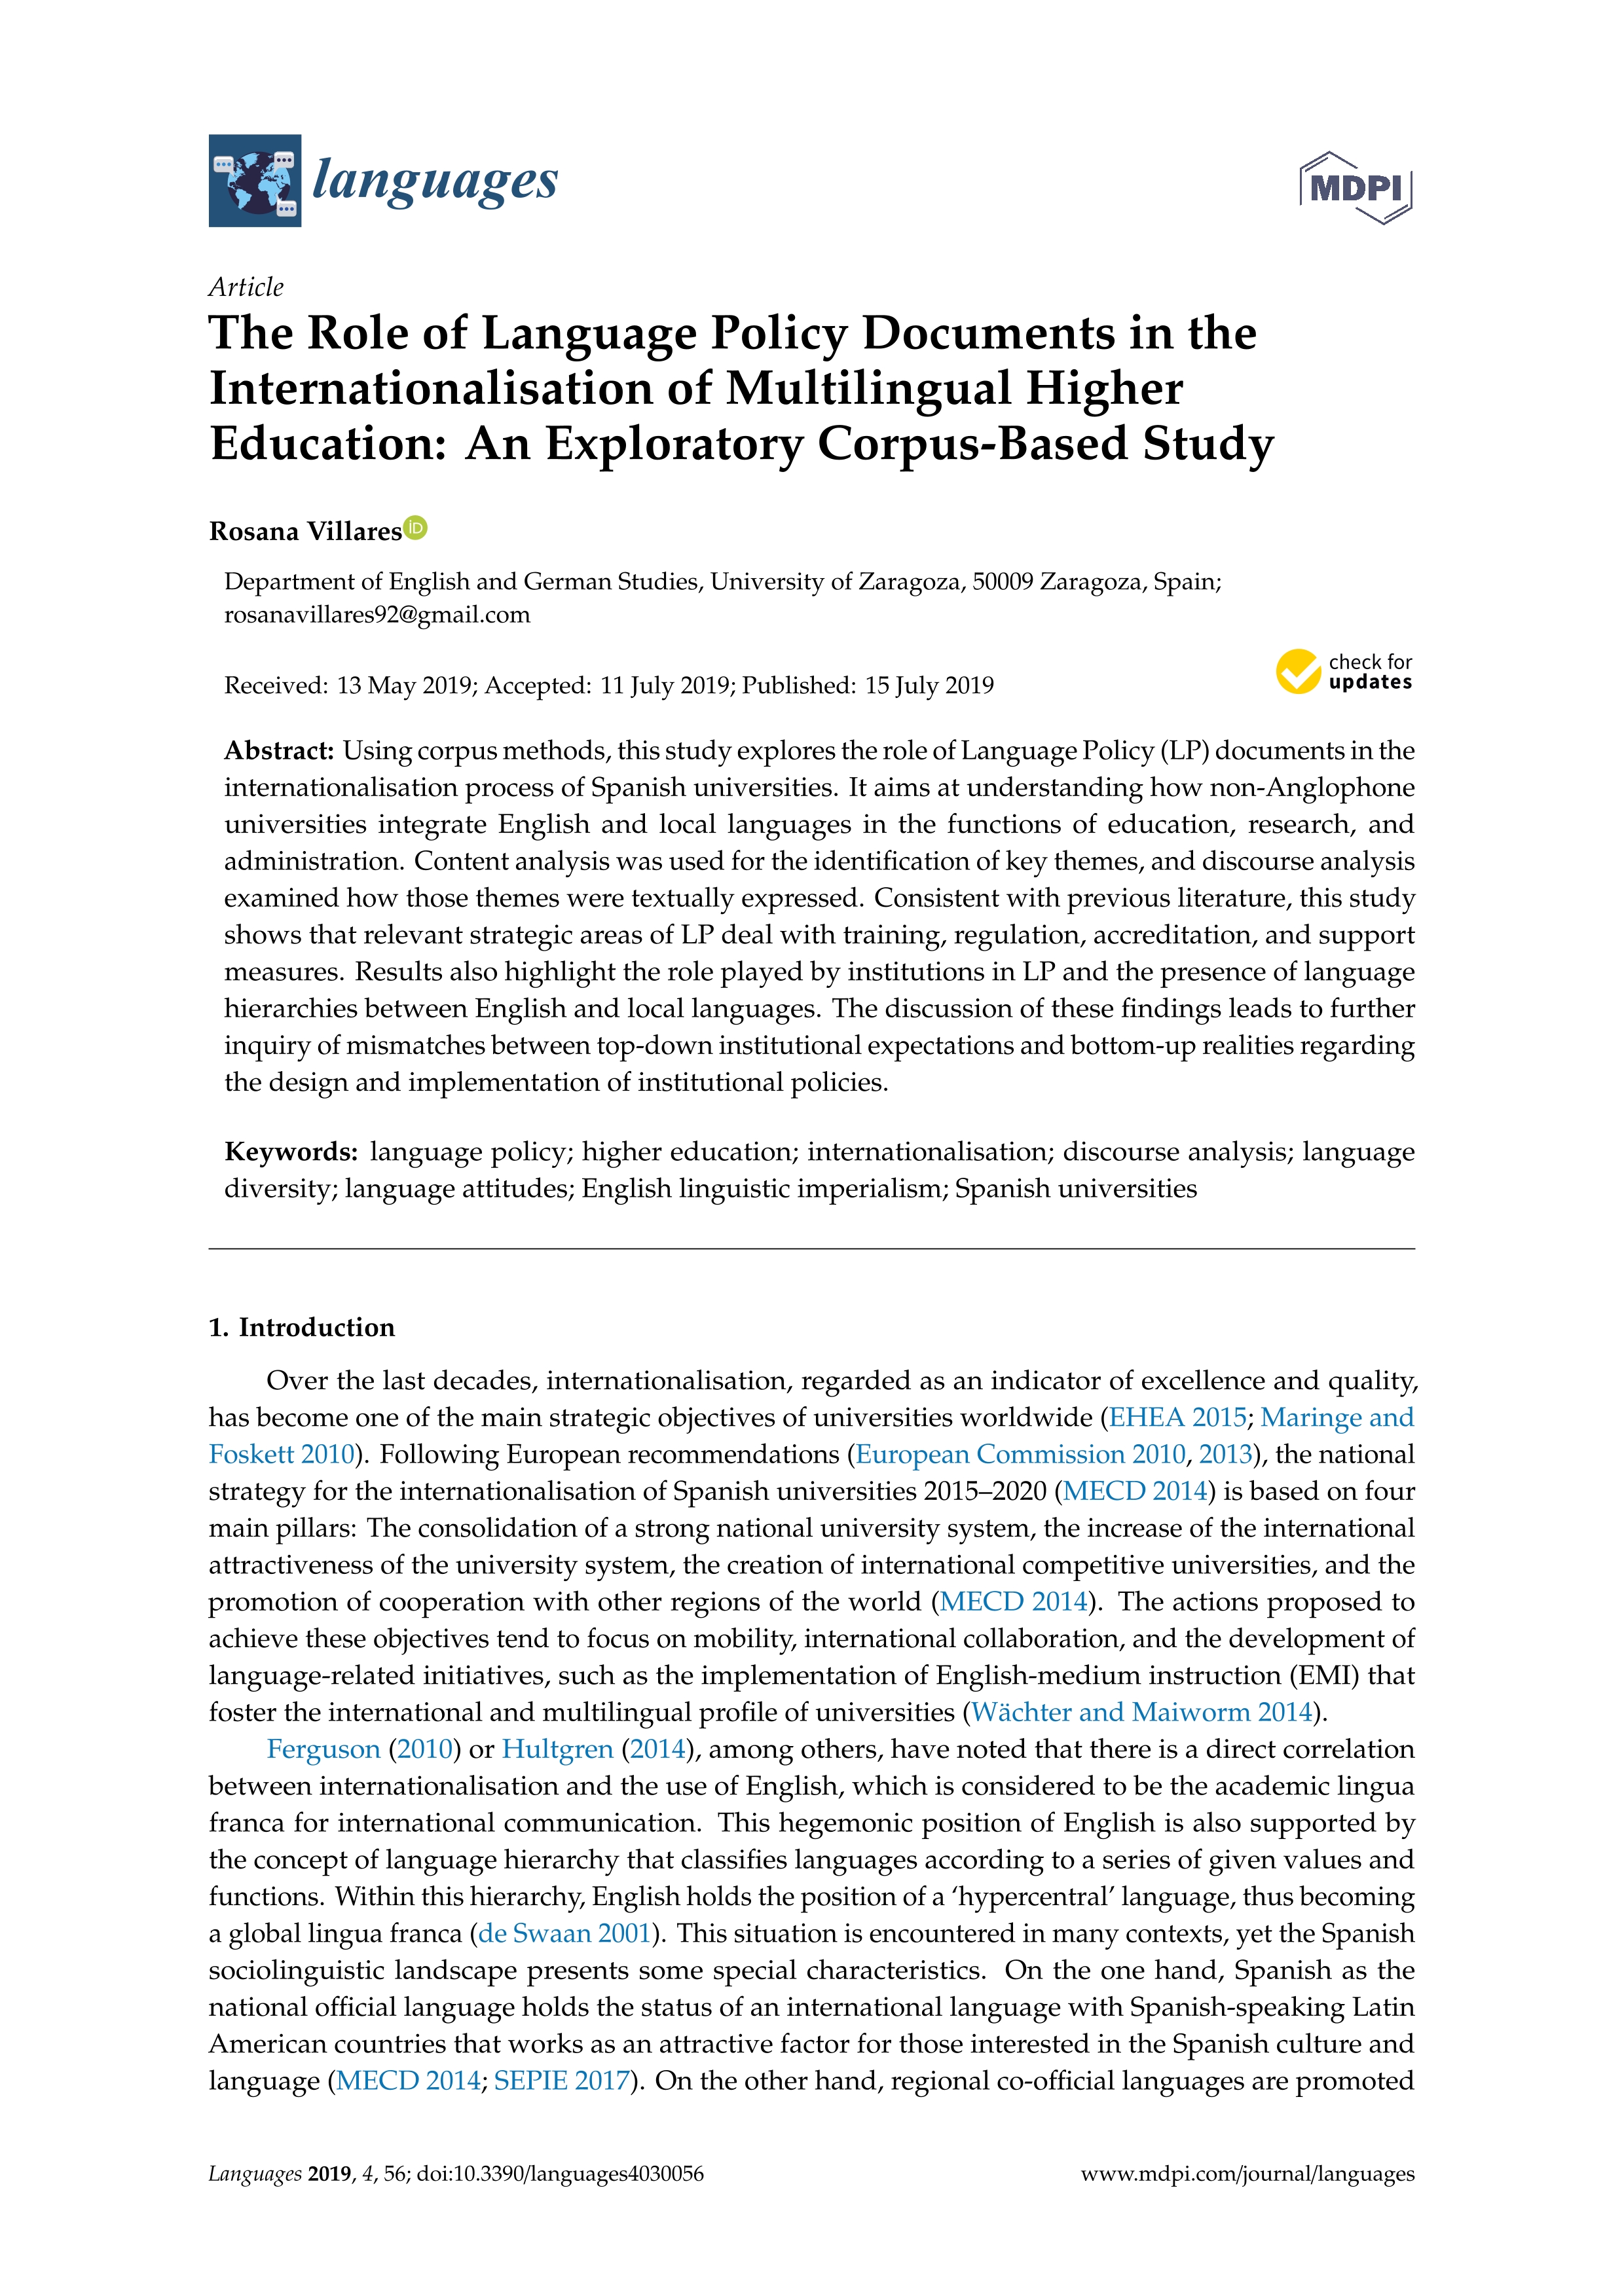 The role of language policy documents in the internationalisation of multilingual higher education: an exploratory corpus-based study